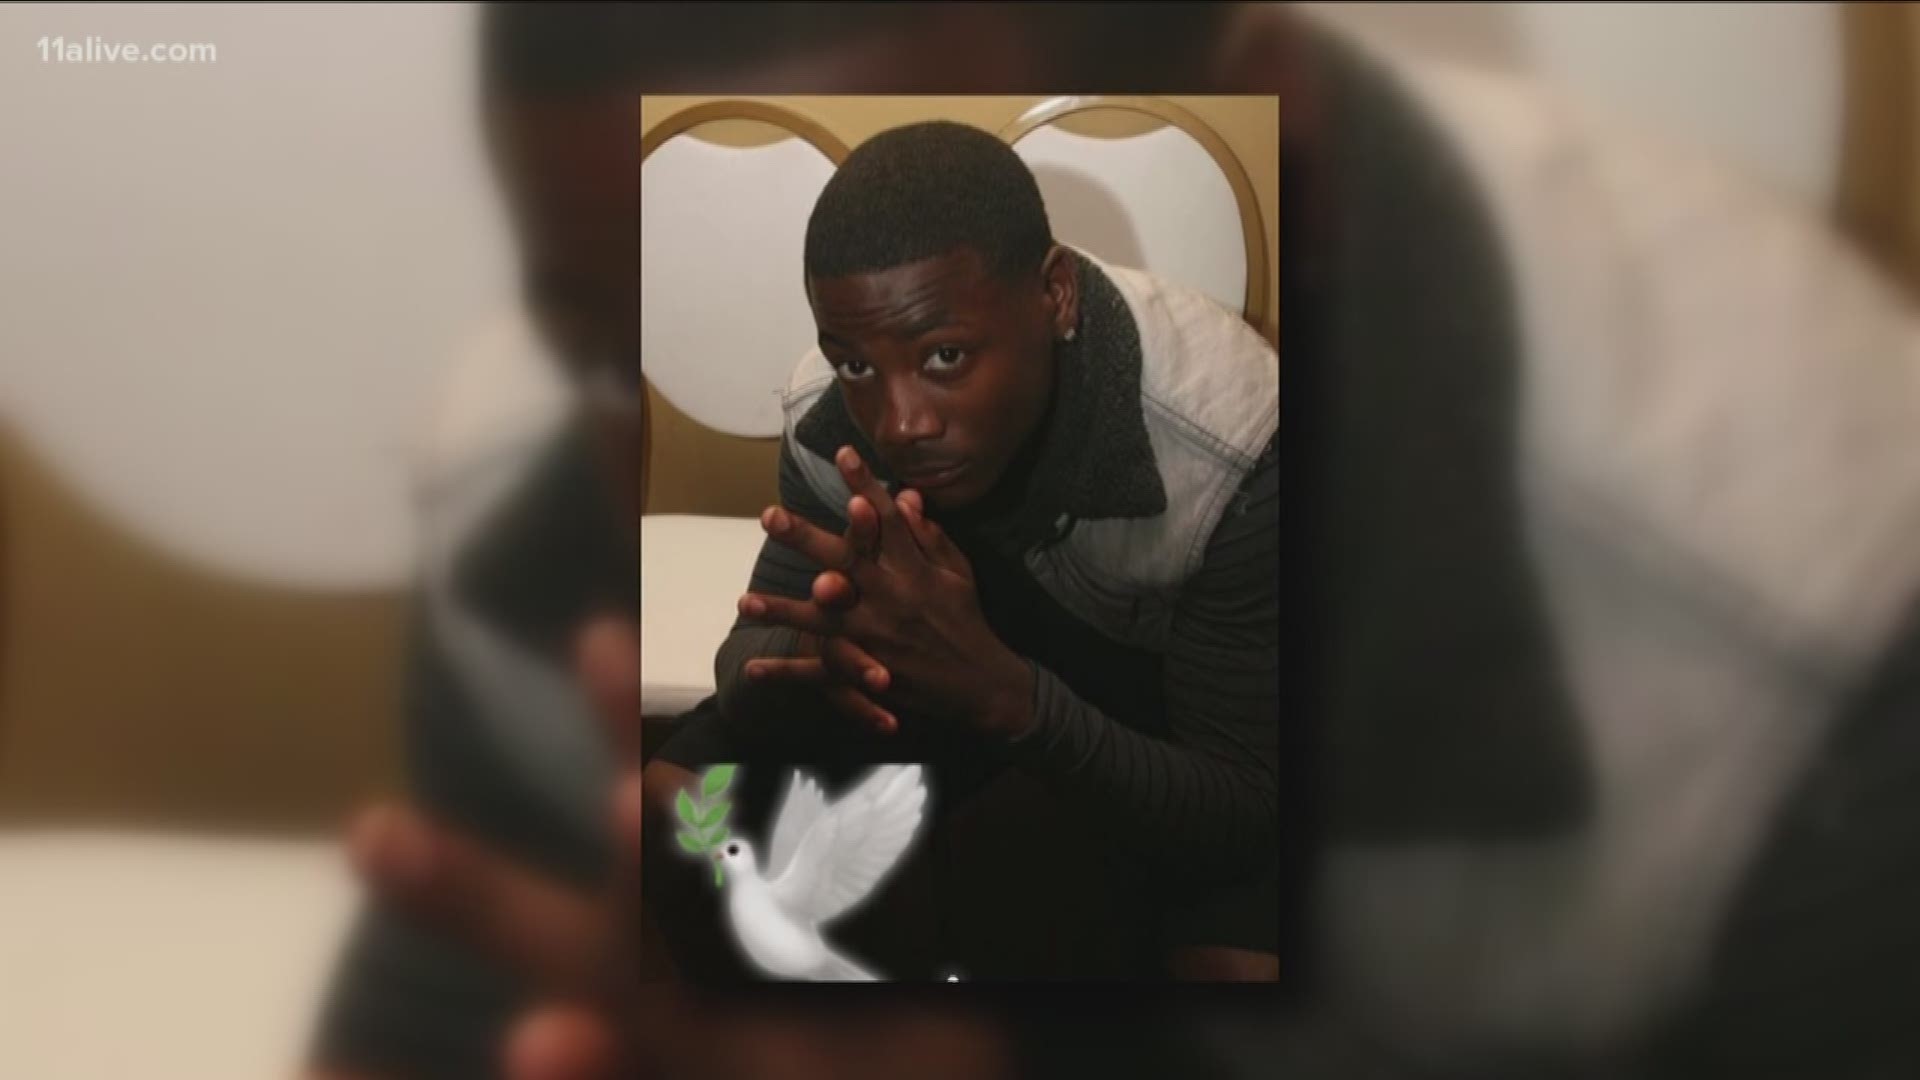 Family and friends have identified the man shot and killed at an apartment complex in southwest Atlanta on Tuesday as 21-year-old Jimmy Atchison.